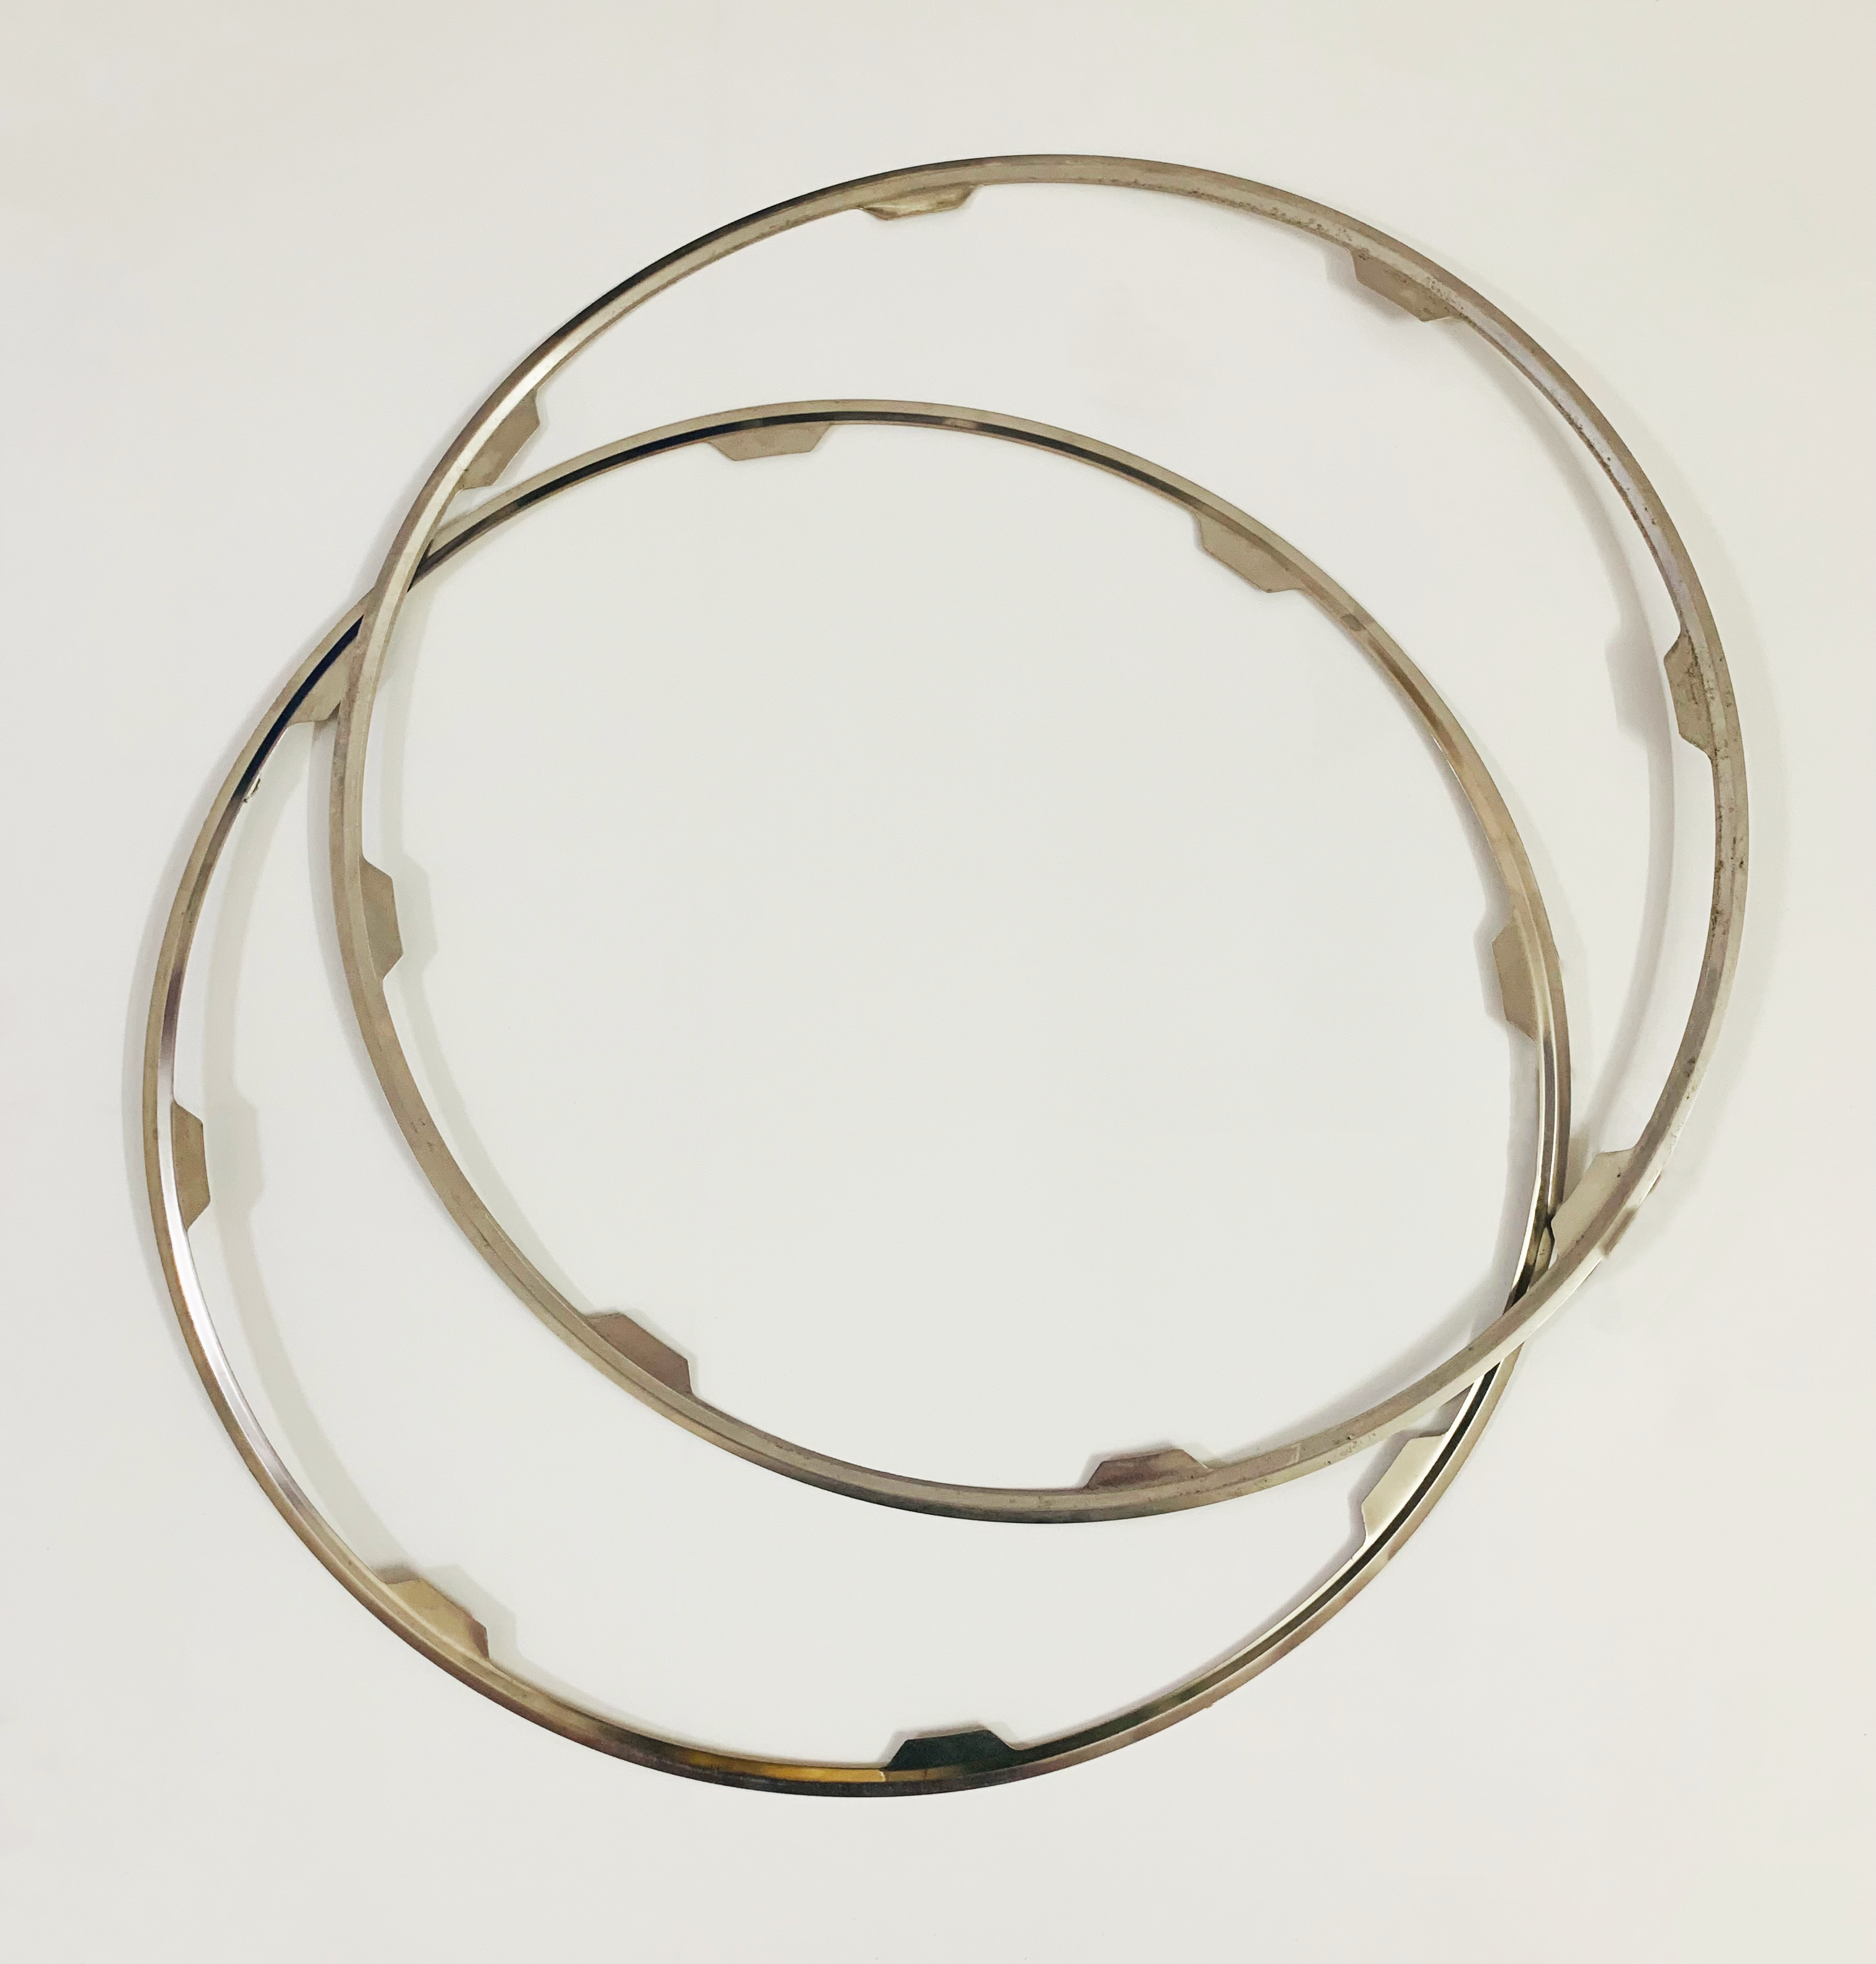 Catalytic Converter Gasket Kit and Exhaust Gasket for DAF 2325403